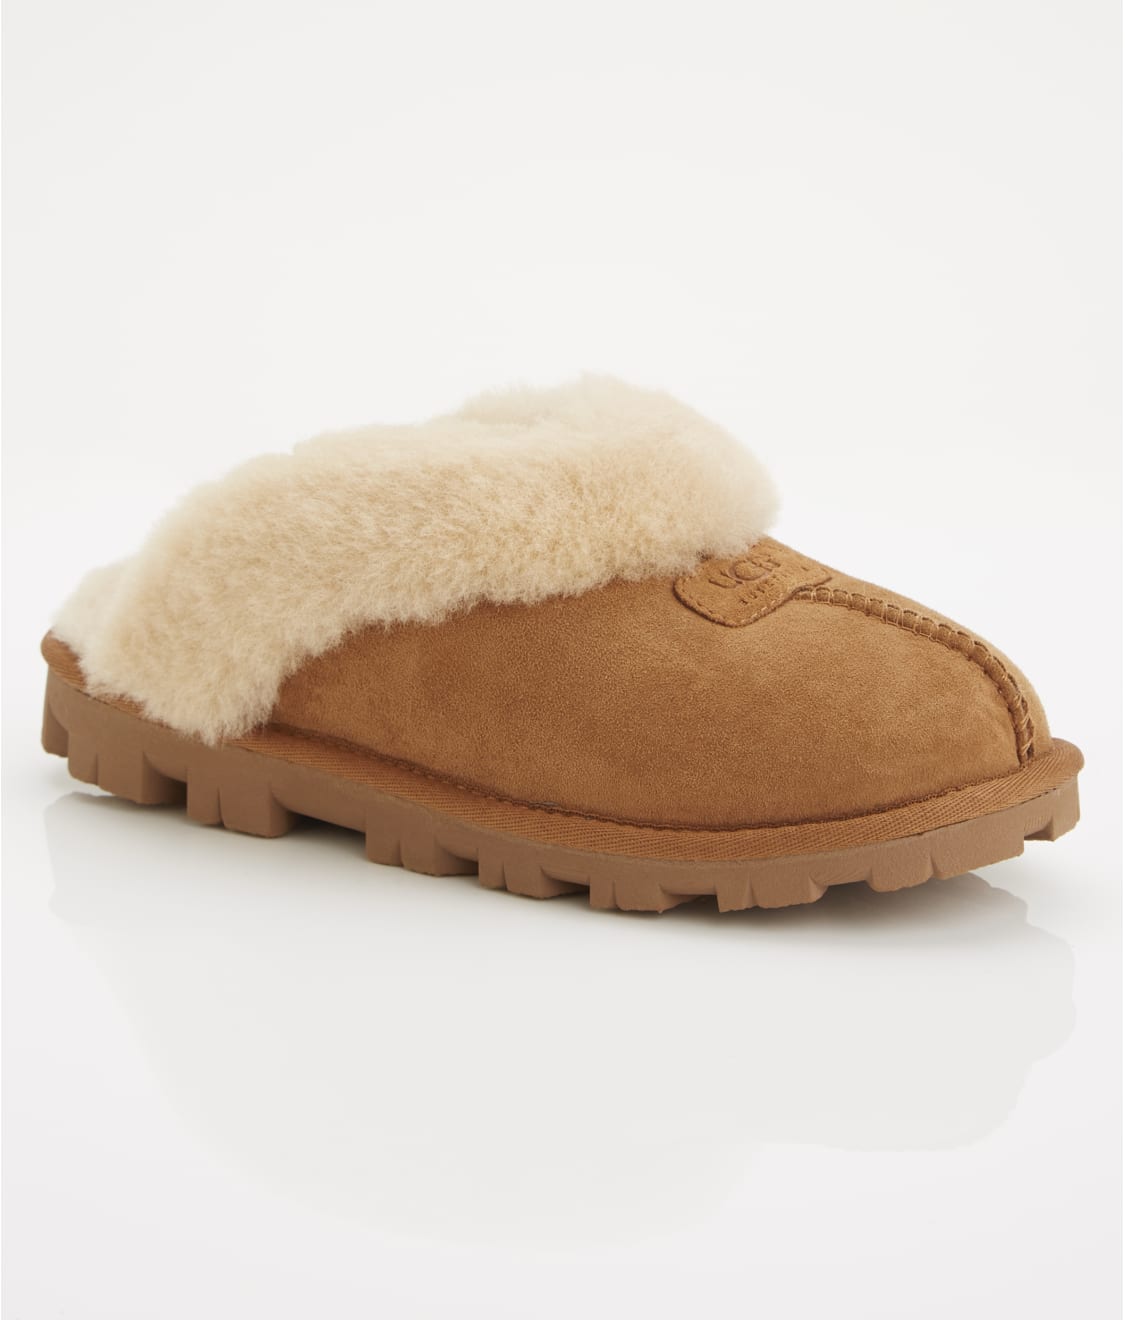 UGG: Coquette Slippers 5125